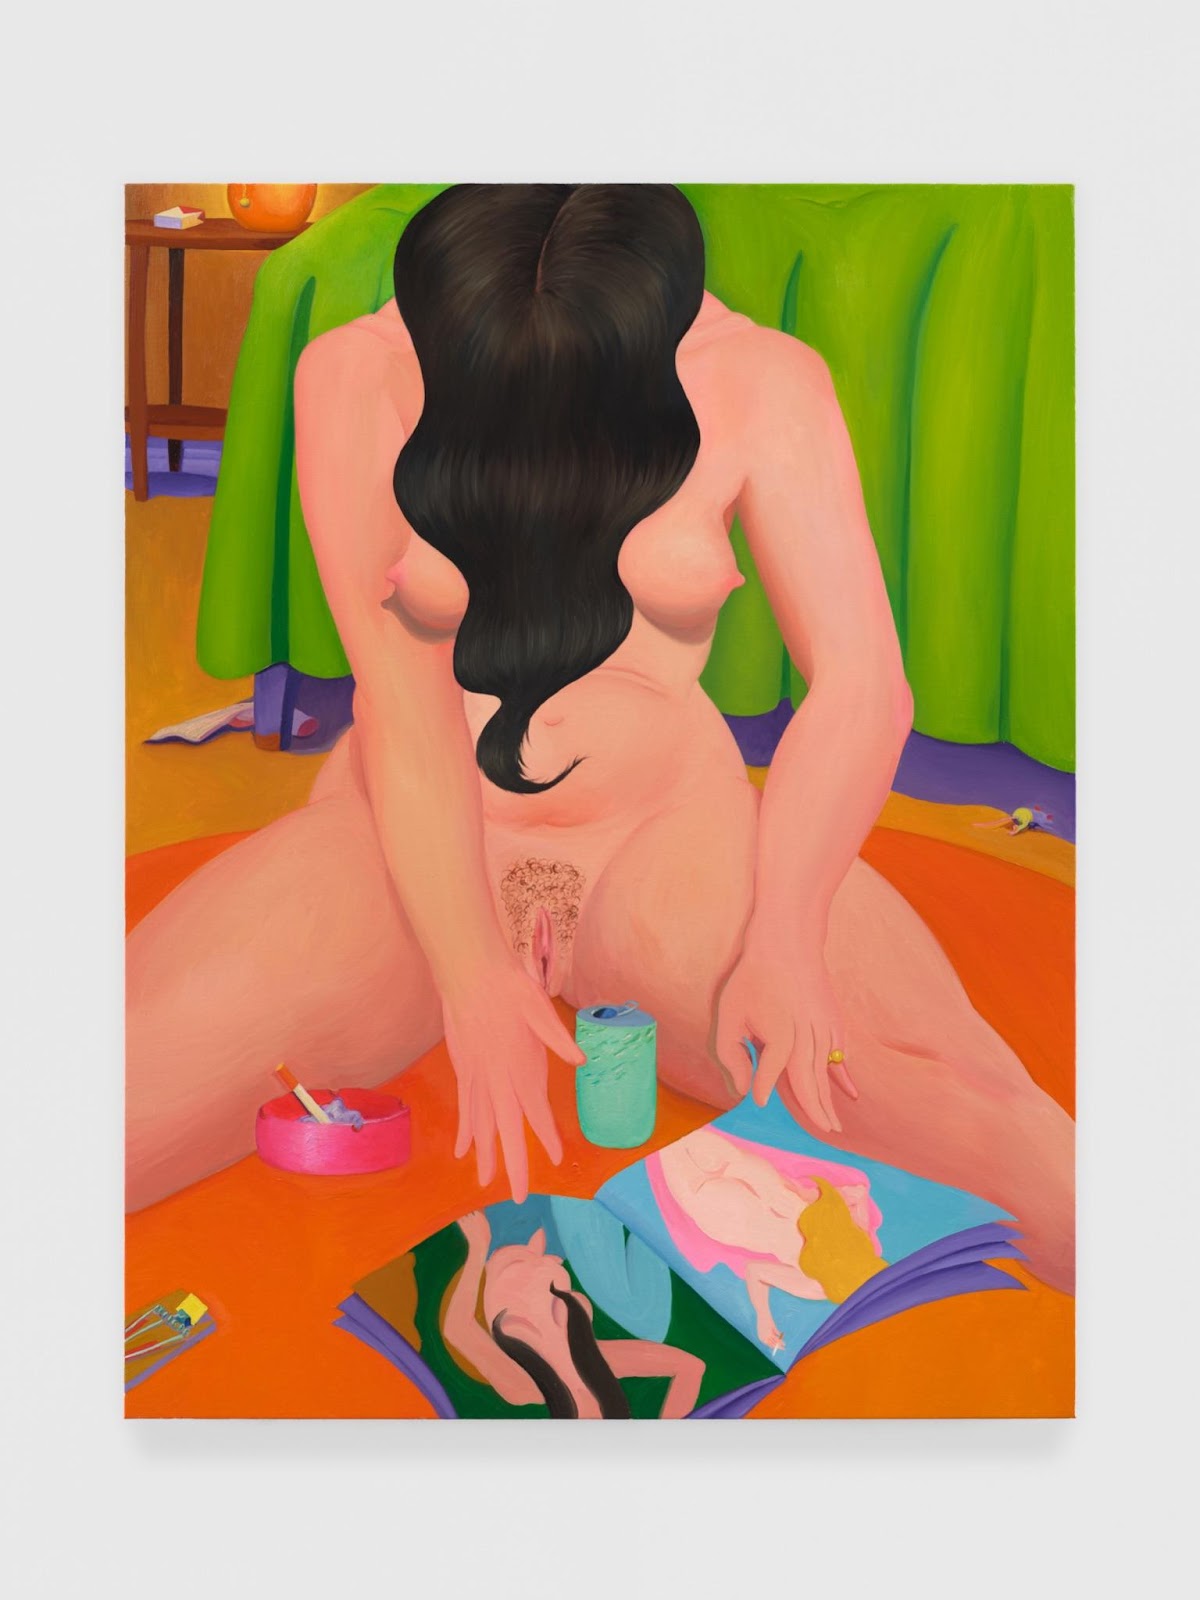 A painting of a light-skinned nude woman seated with her legs open. Her head is down, and her long dark brown hair covers her face and hangs between her breasts. She reads a pornographic magazine and has a blue can open in between her legs, along with a pink ashtray with a cigarette in it, and a mousetrap in front of it. She is sitting on the floor, and a bed with green sheets is behind her. A lone sock peeks out from under the bed.